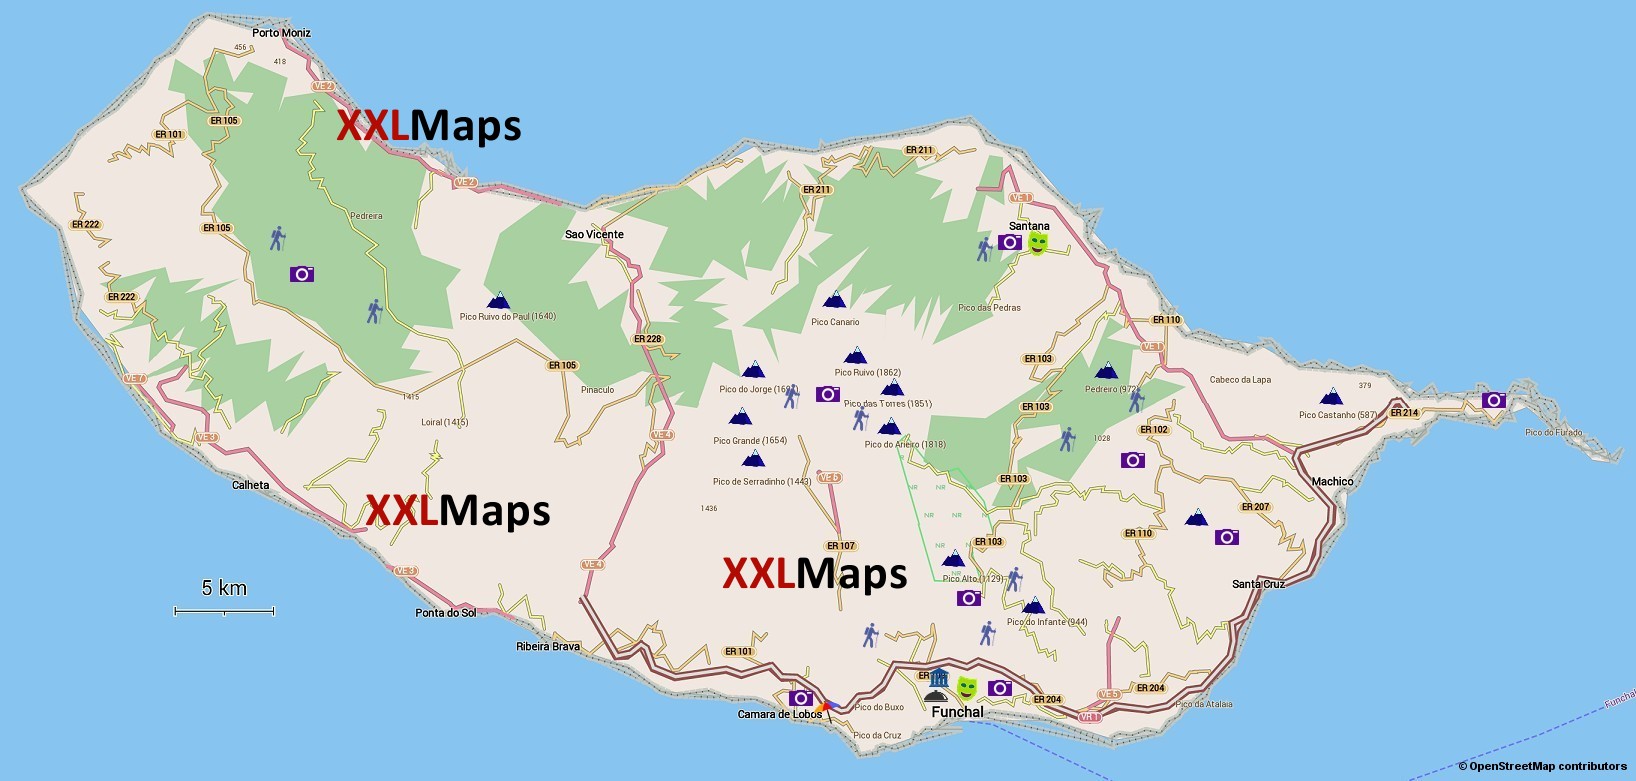 Physical map of Madeira